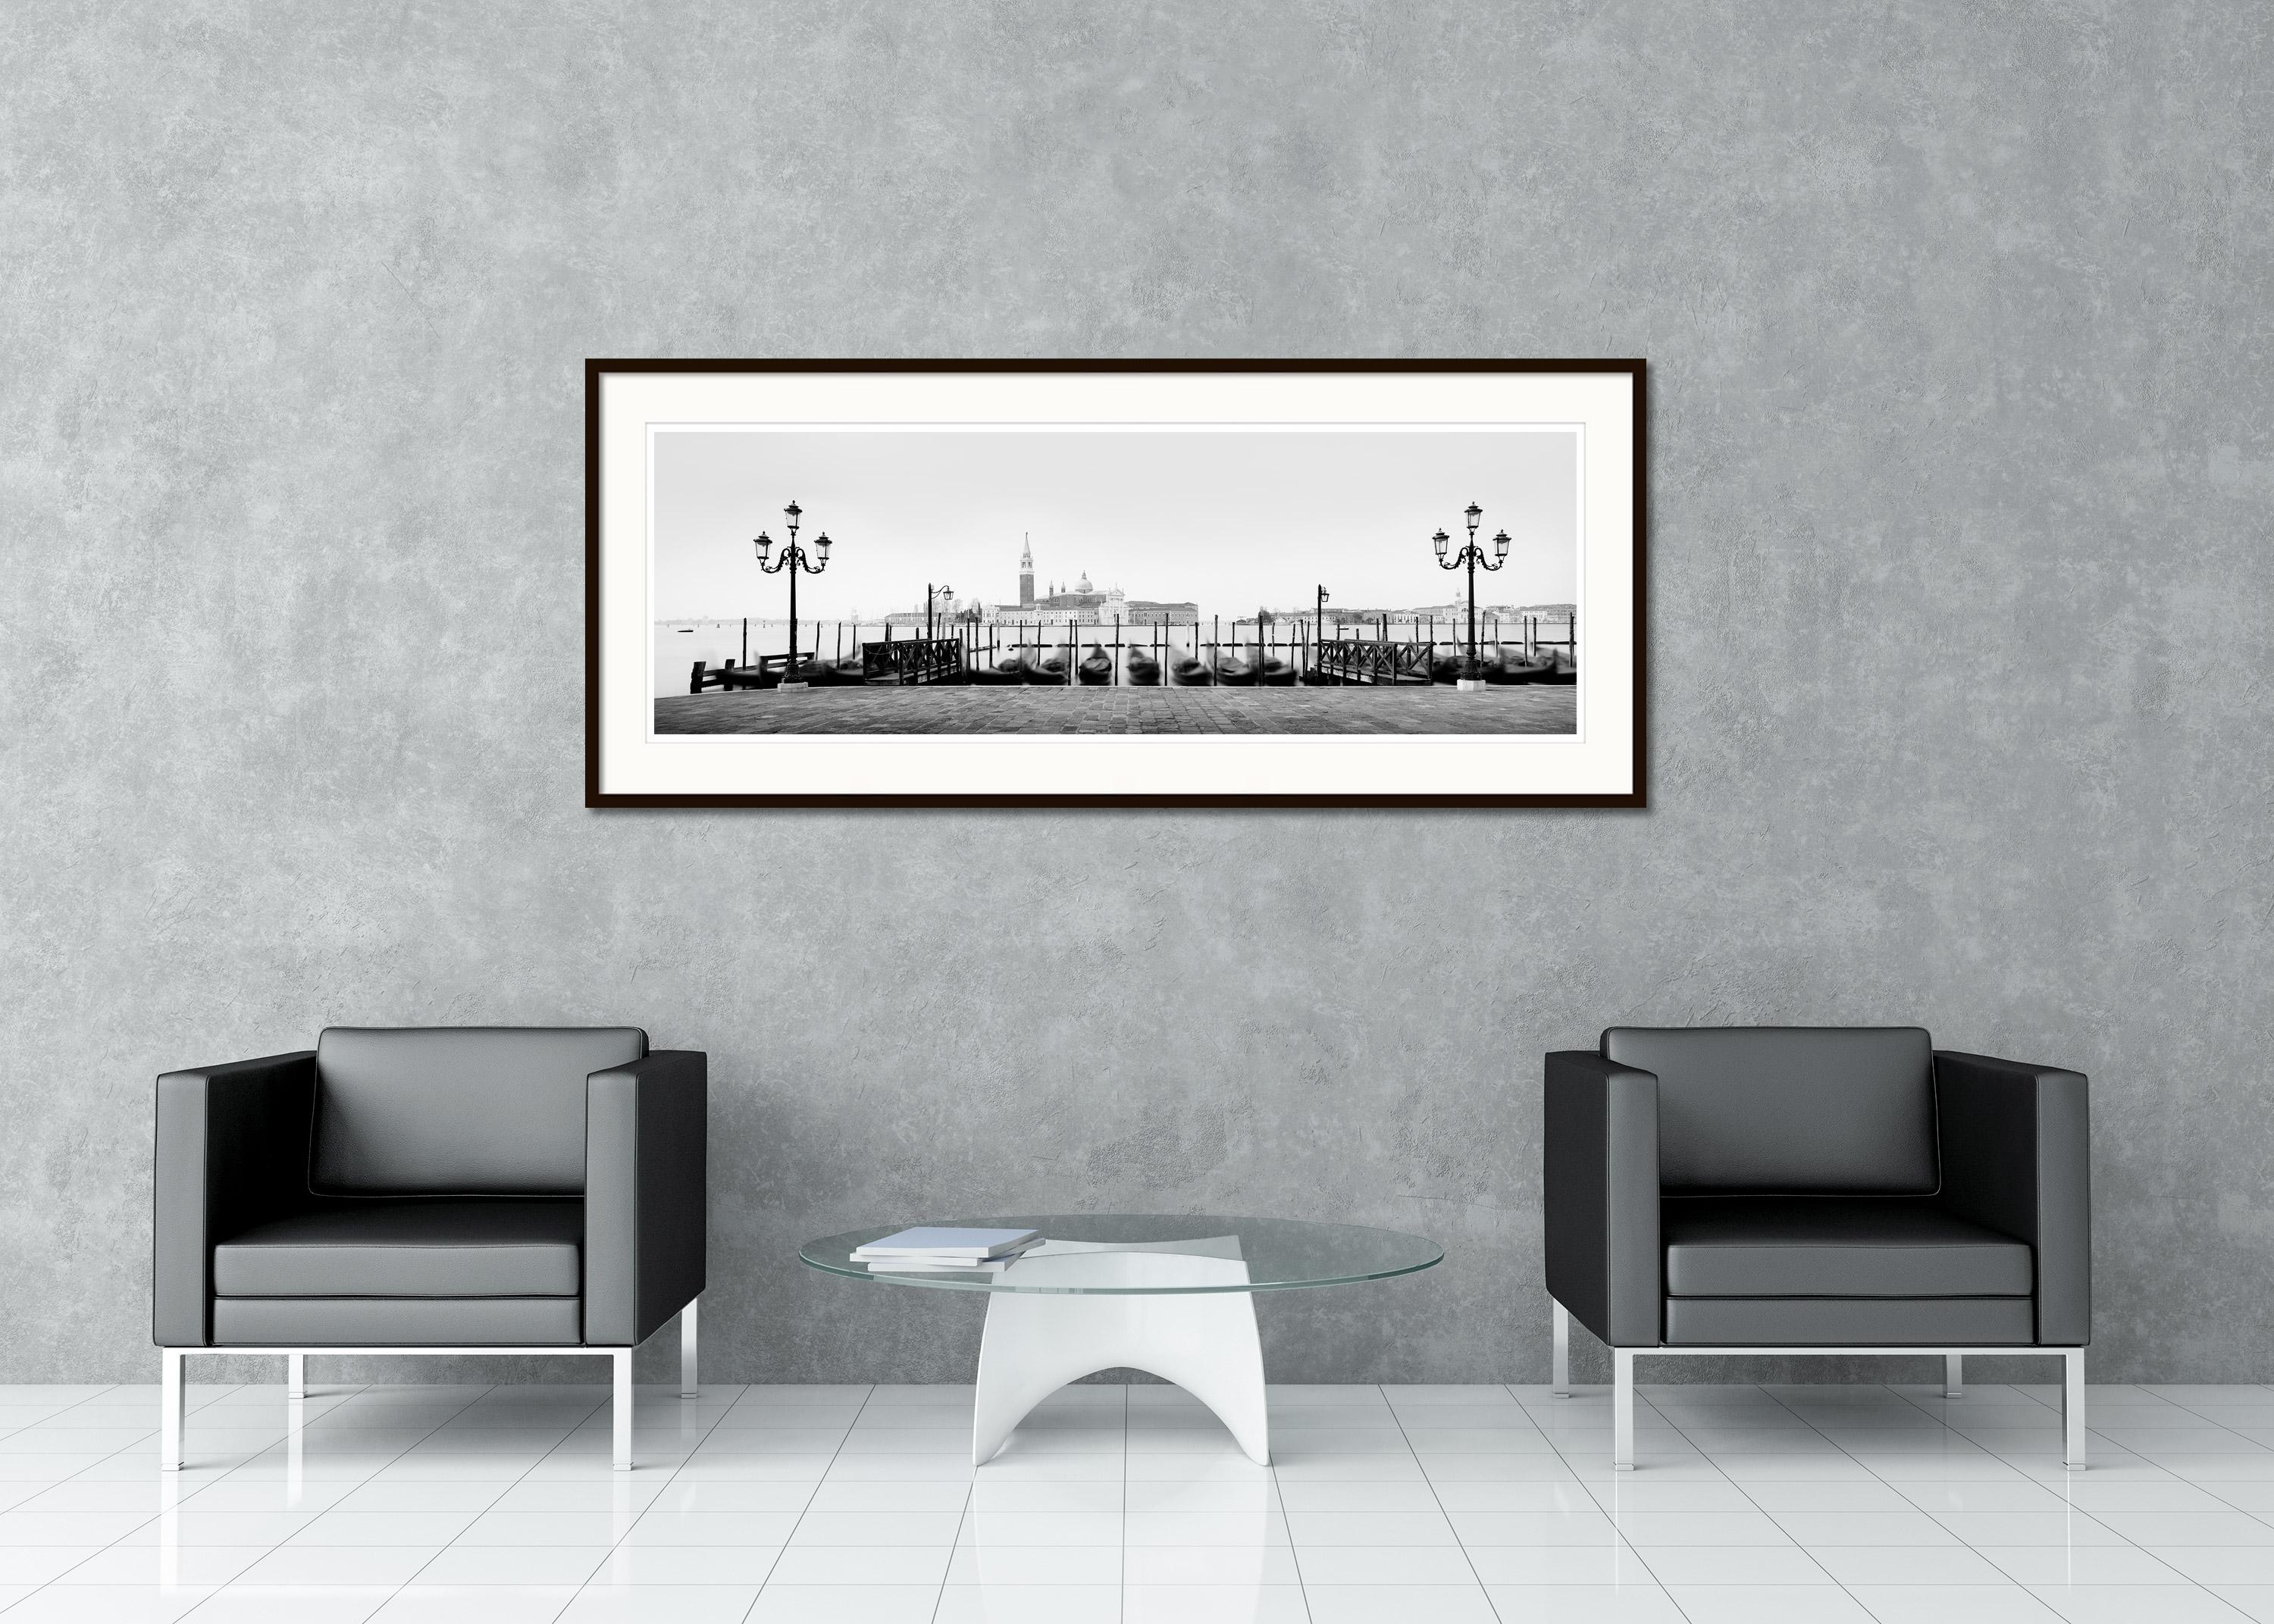 Black and white fine art panorama landscape - cityscape photography. Gondola in front of basilica on grand canal in Venice, Italy. Archival pigment ink print, edition of 9. Signed, titled, dated and numbered by artist. Certificate of authenticity